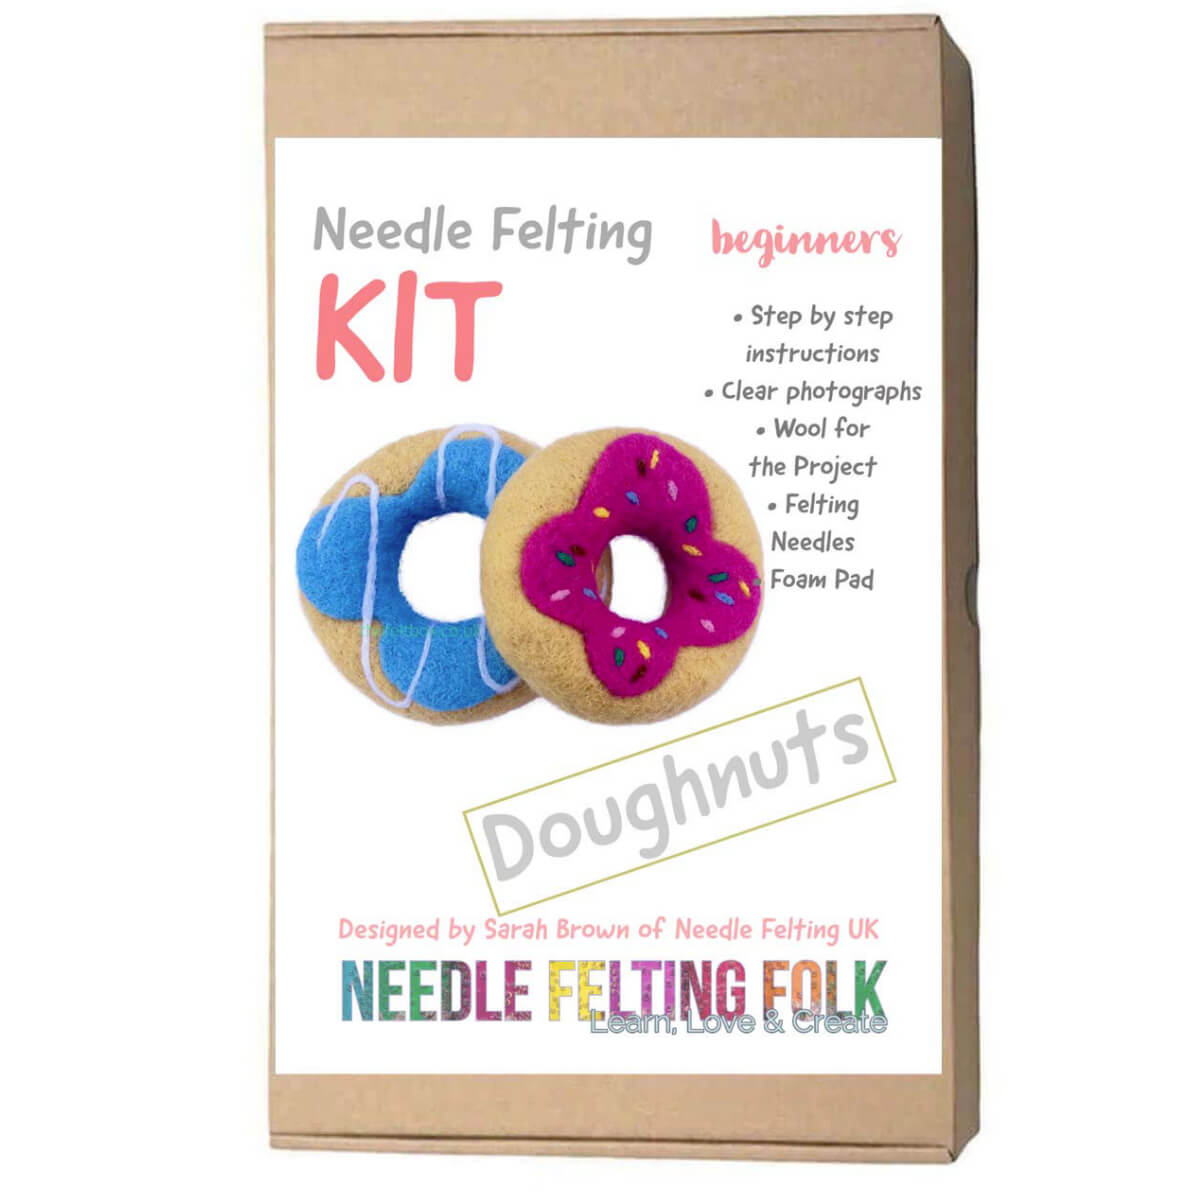 Needle Felting Kit. Beginners. Delicious Doughnuts by Sarah Brown. Makes Two.